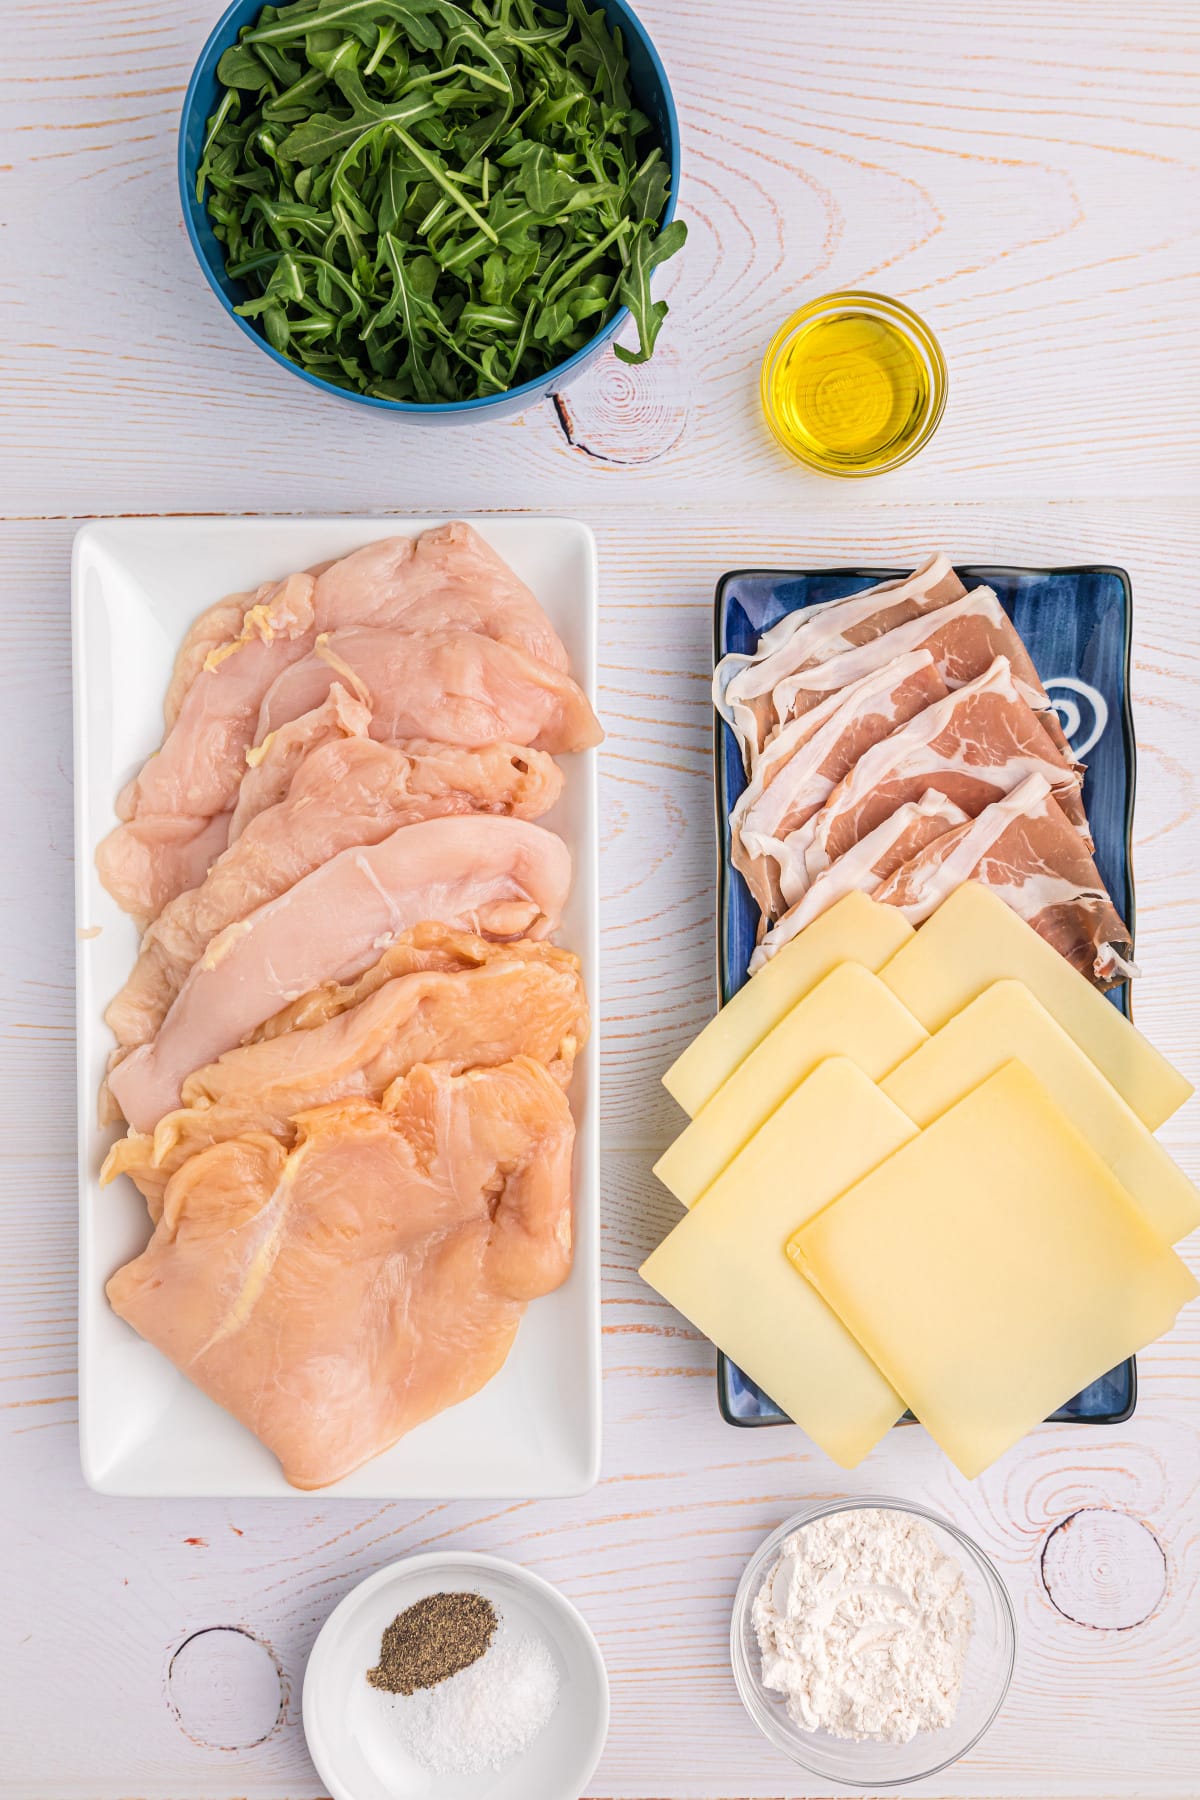 ingredients displayed for making gruyere arugula and prosciutto stuffed chicken breasts